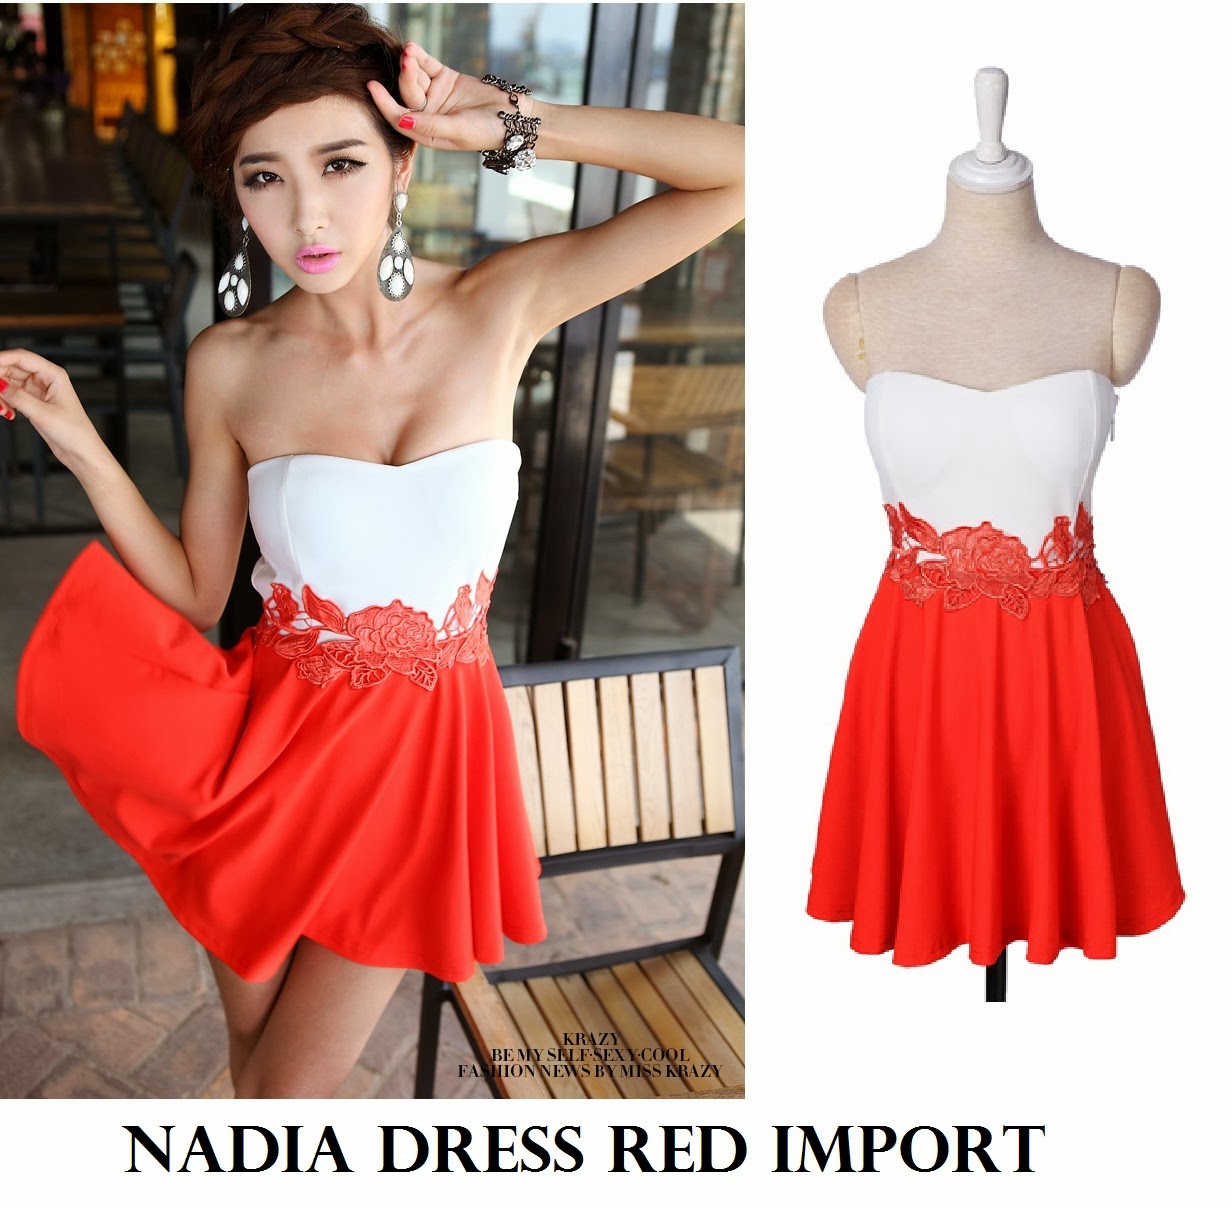 Red import